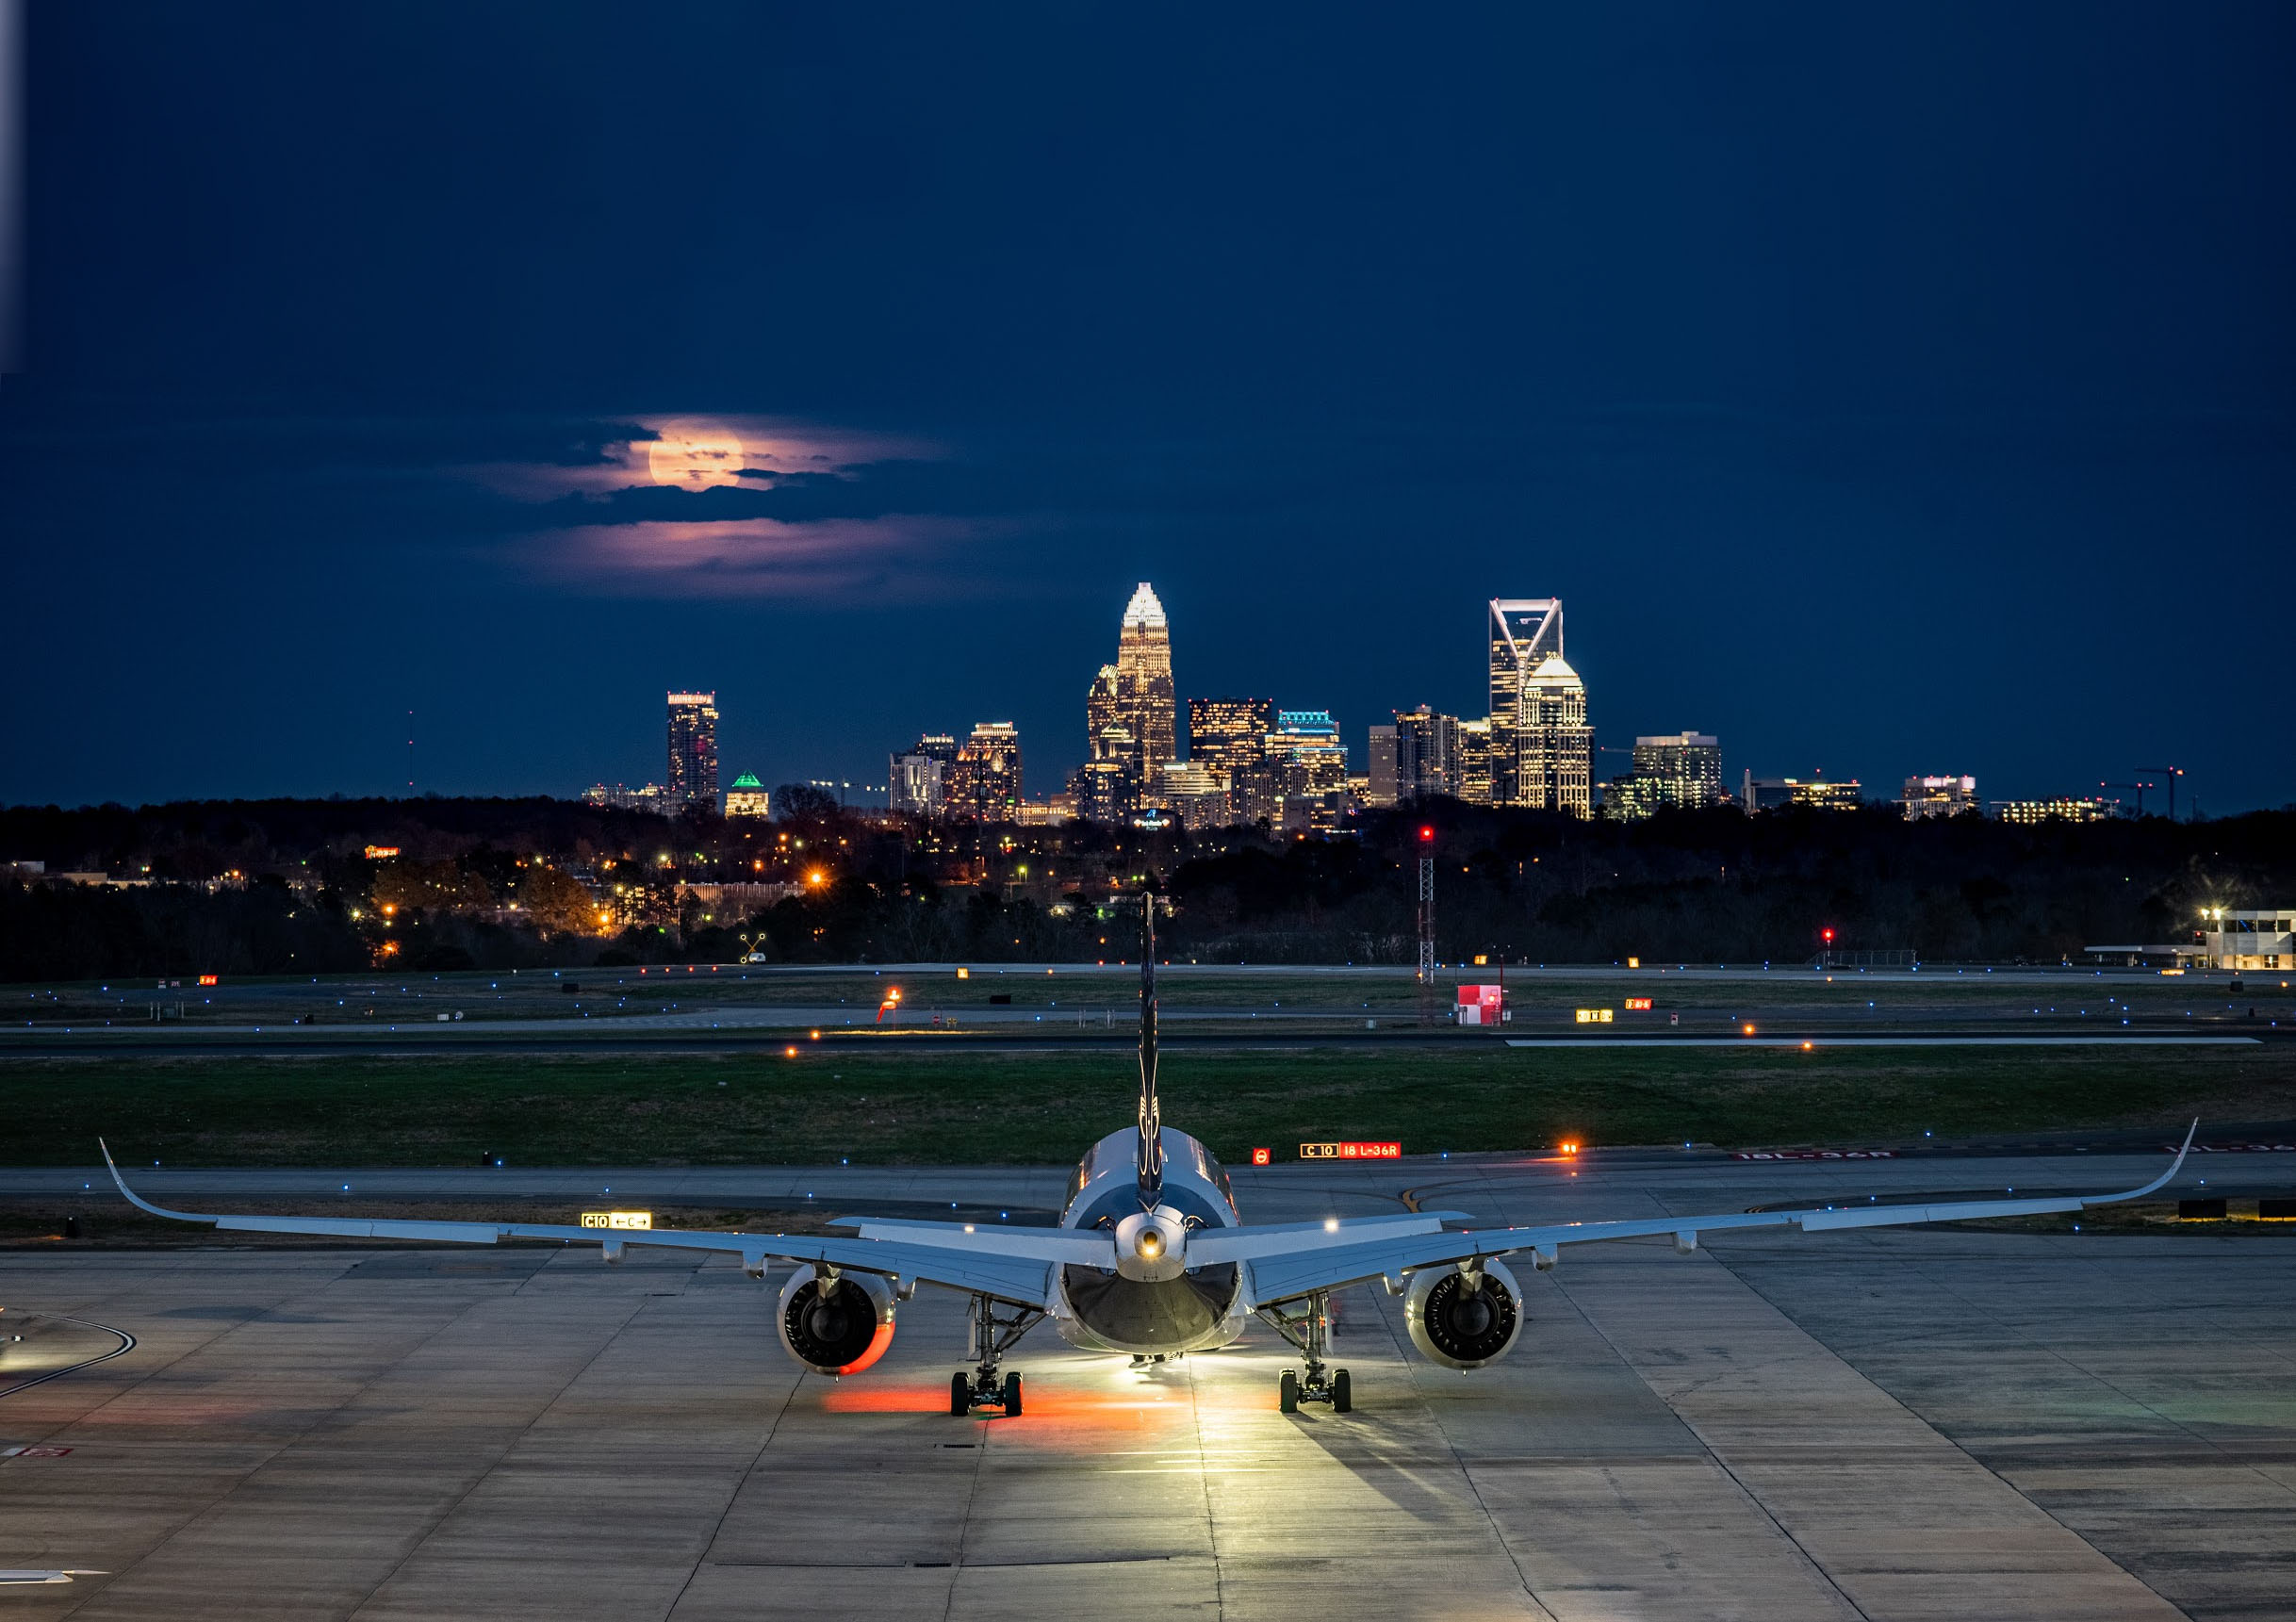 Charlotte Douglas International Airport (CLT) at night - view towards city skyline, rich with commercial real estate opportunities.